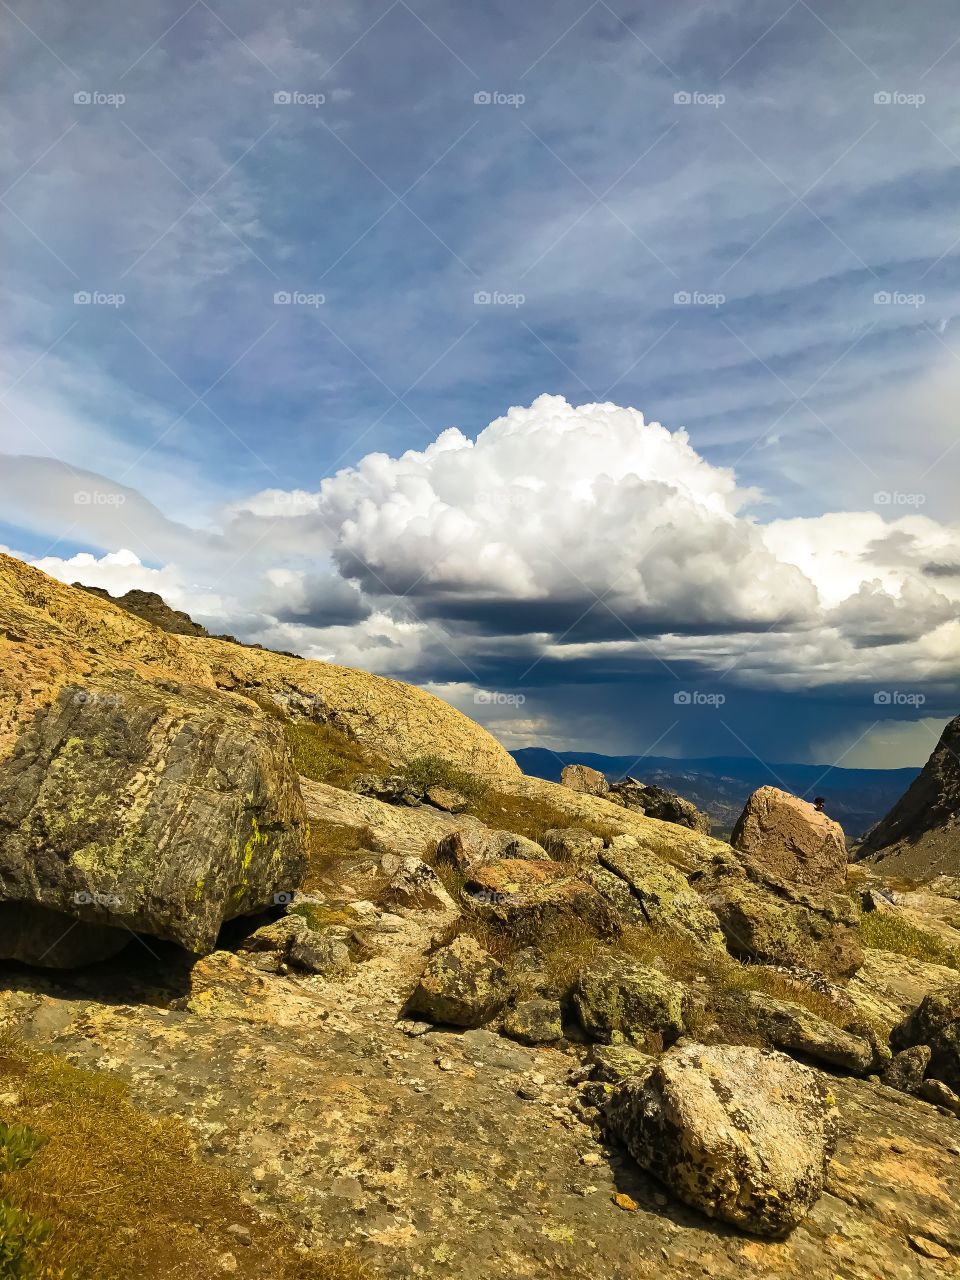 Storm on the horizon. 11,000 feet of altitude in the Rocky Mountains.